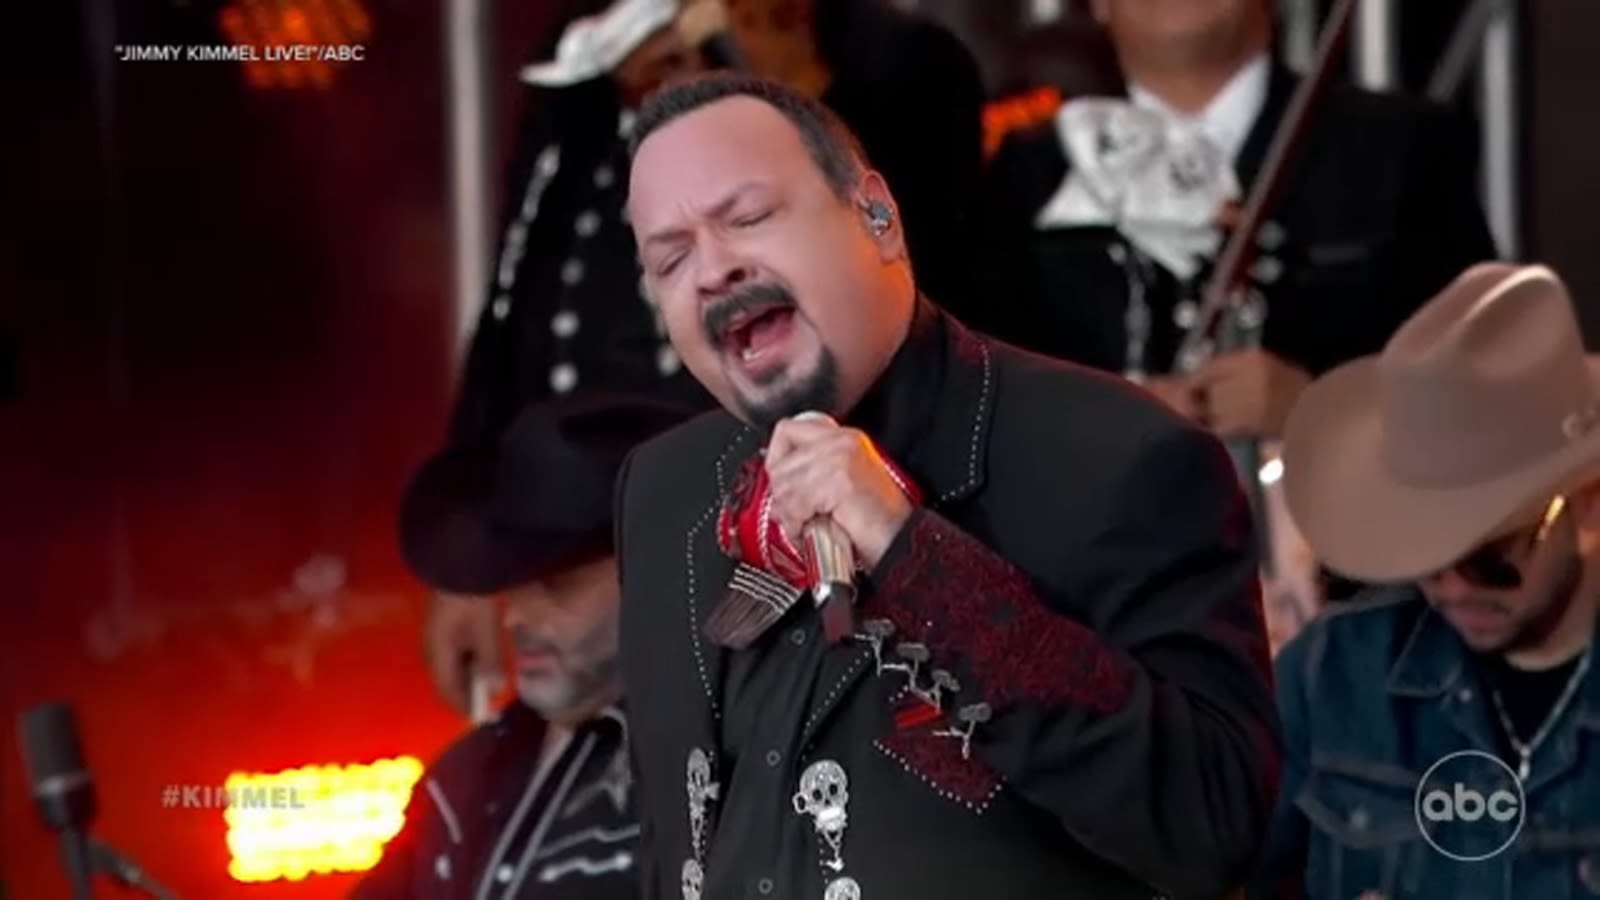 Pepe Aguilar becomes first artist to perform mariachi music on 'Jimmy Kimmel Live!'